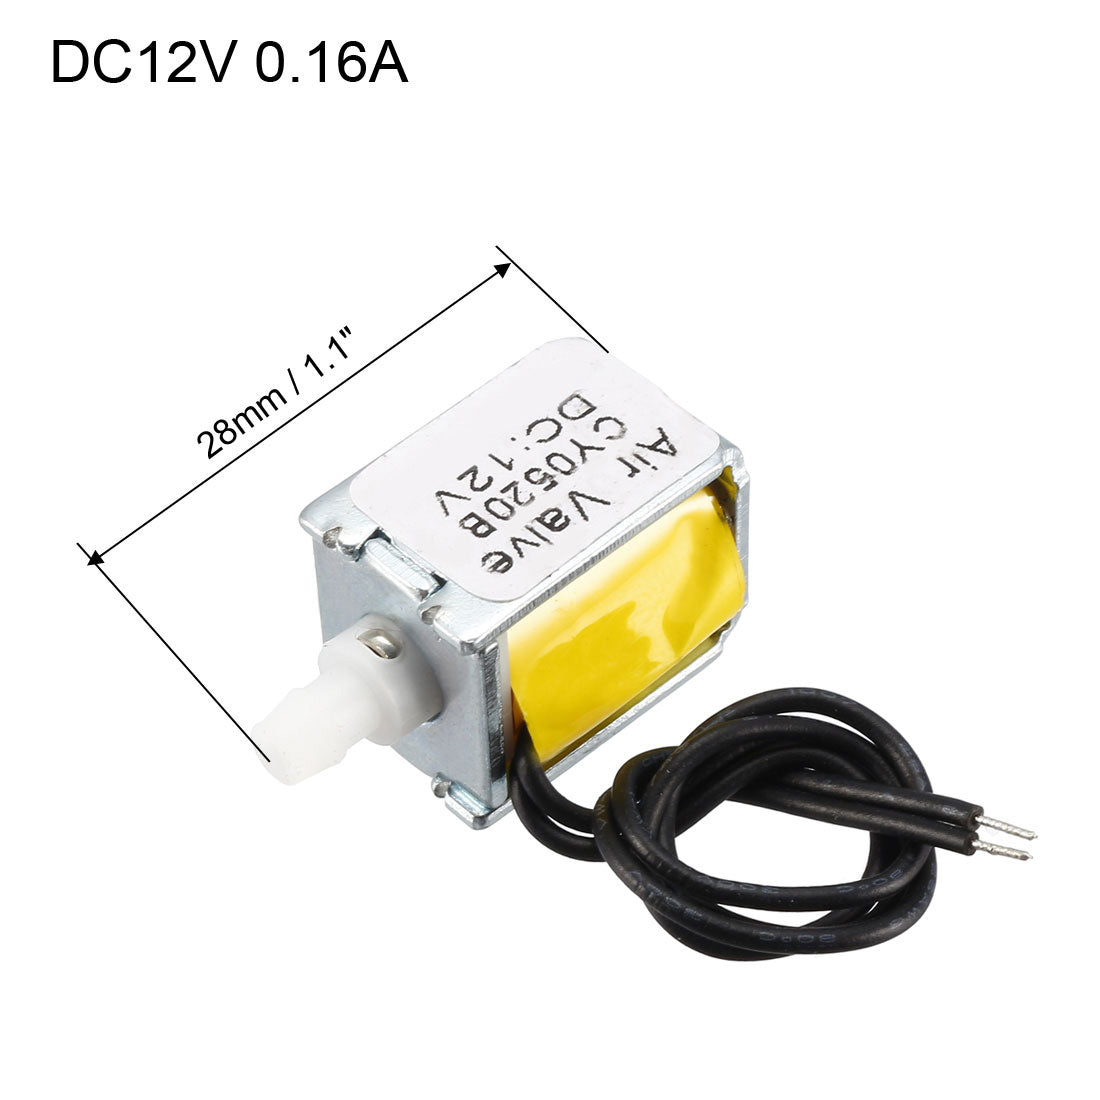 uxcell Uxcell Miniature Solenoid Valve Normally Closed DC12V 0.16A Air Solenoid Valve